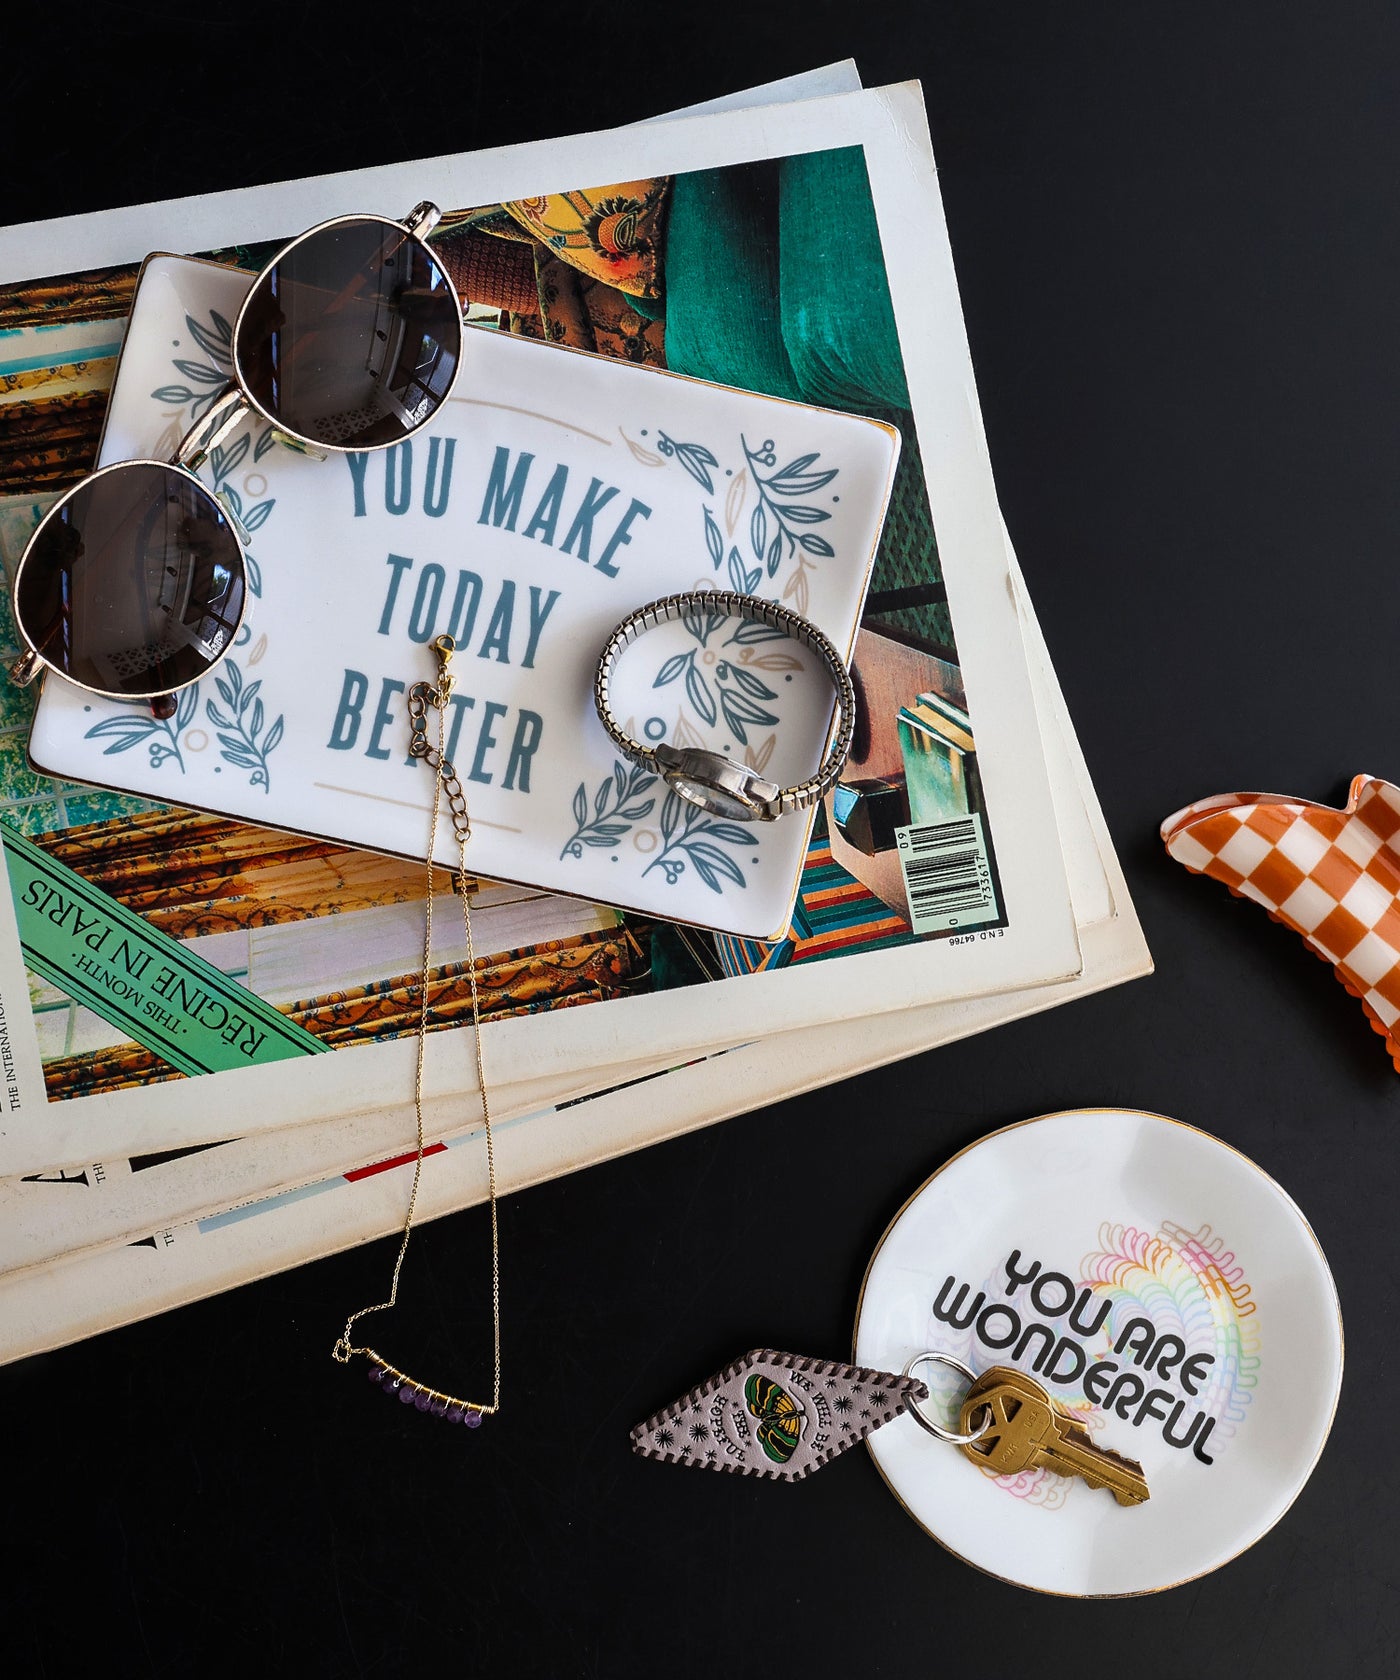 You Make Today Better Catchall Tray